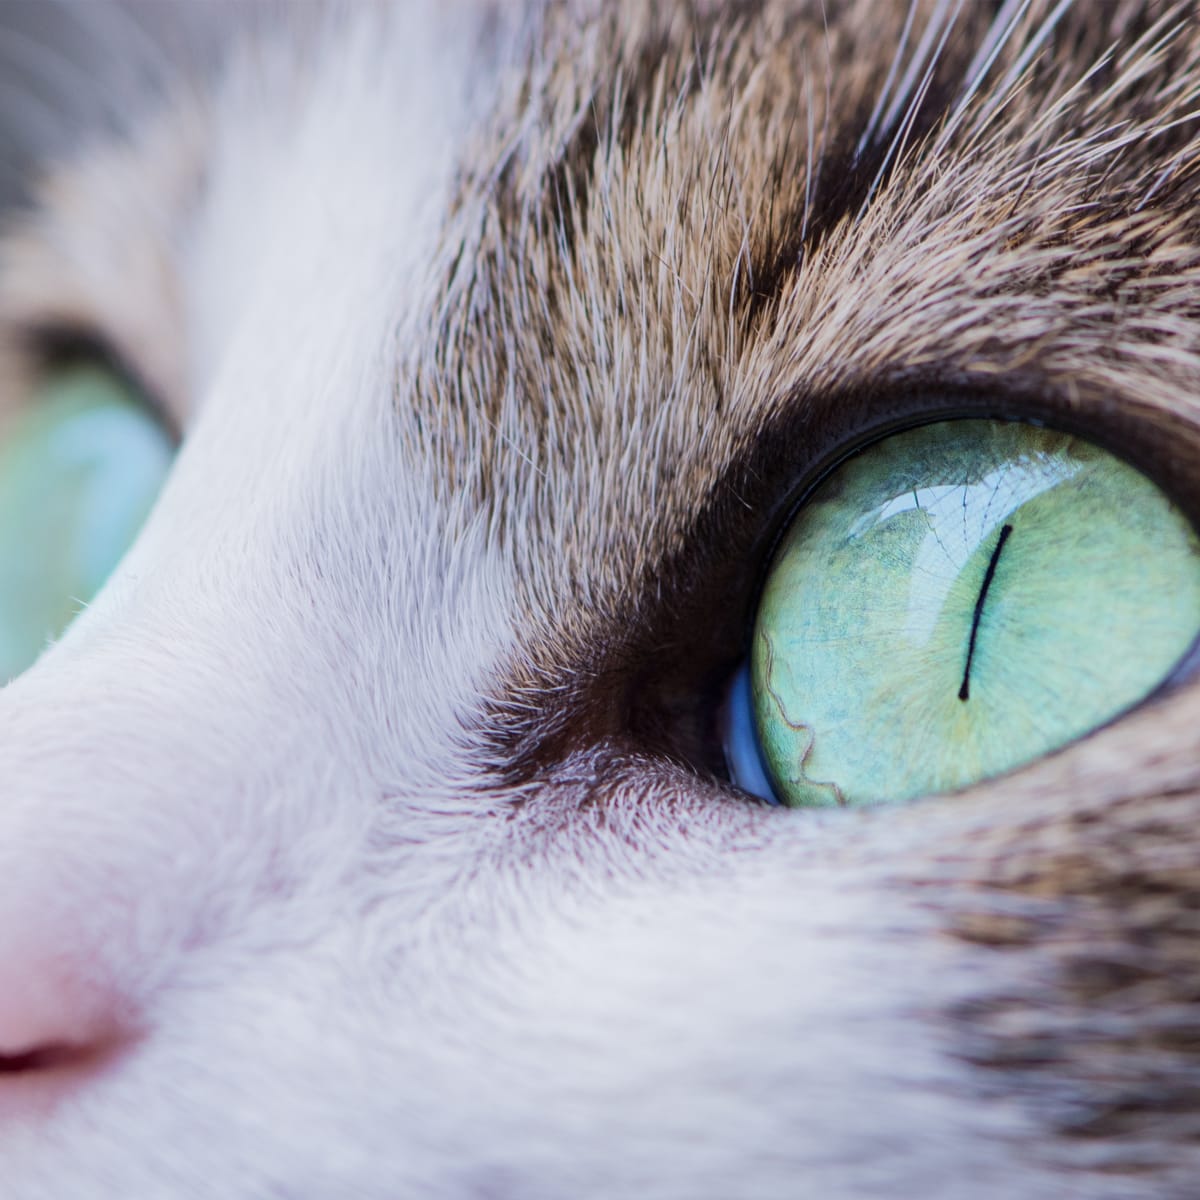 20 Top Images How Do You Treat Cherry Eye In Cats 8 Common Eye